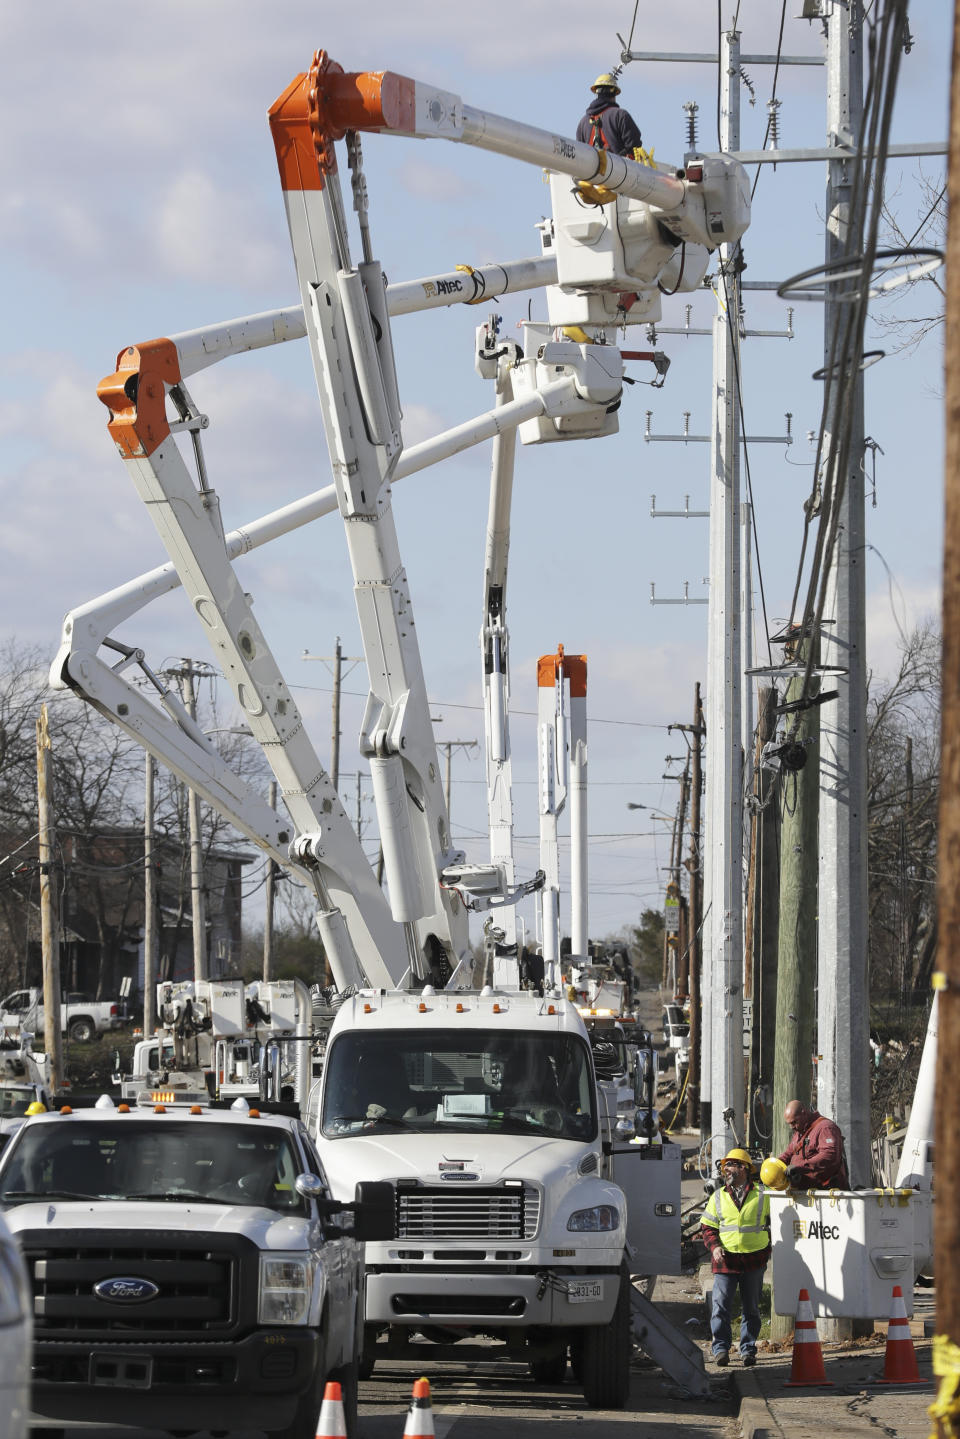 Workers repair power lines Friday, March 6, 2020, in Nashville, Tenn. Utility companies, residents and businesses face a huge cleanup effort after tornadoes hit the state Tuesday. (AP Photo/Mark Humphrey)